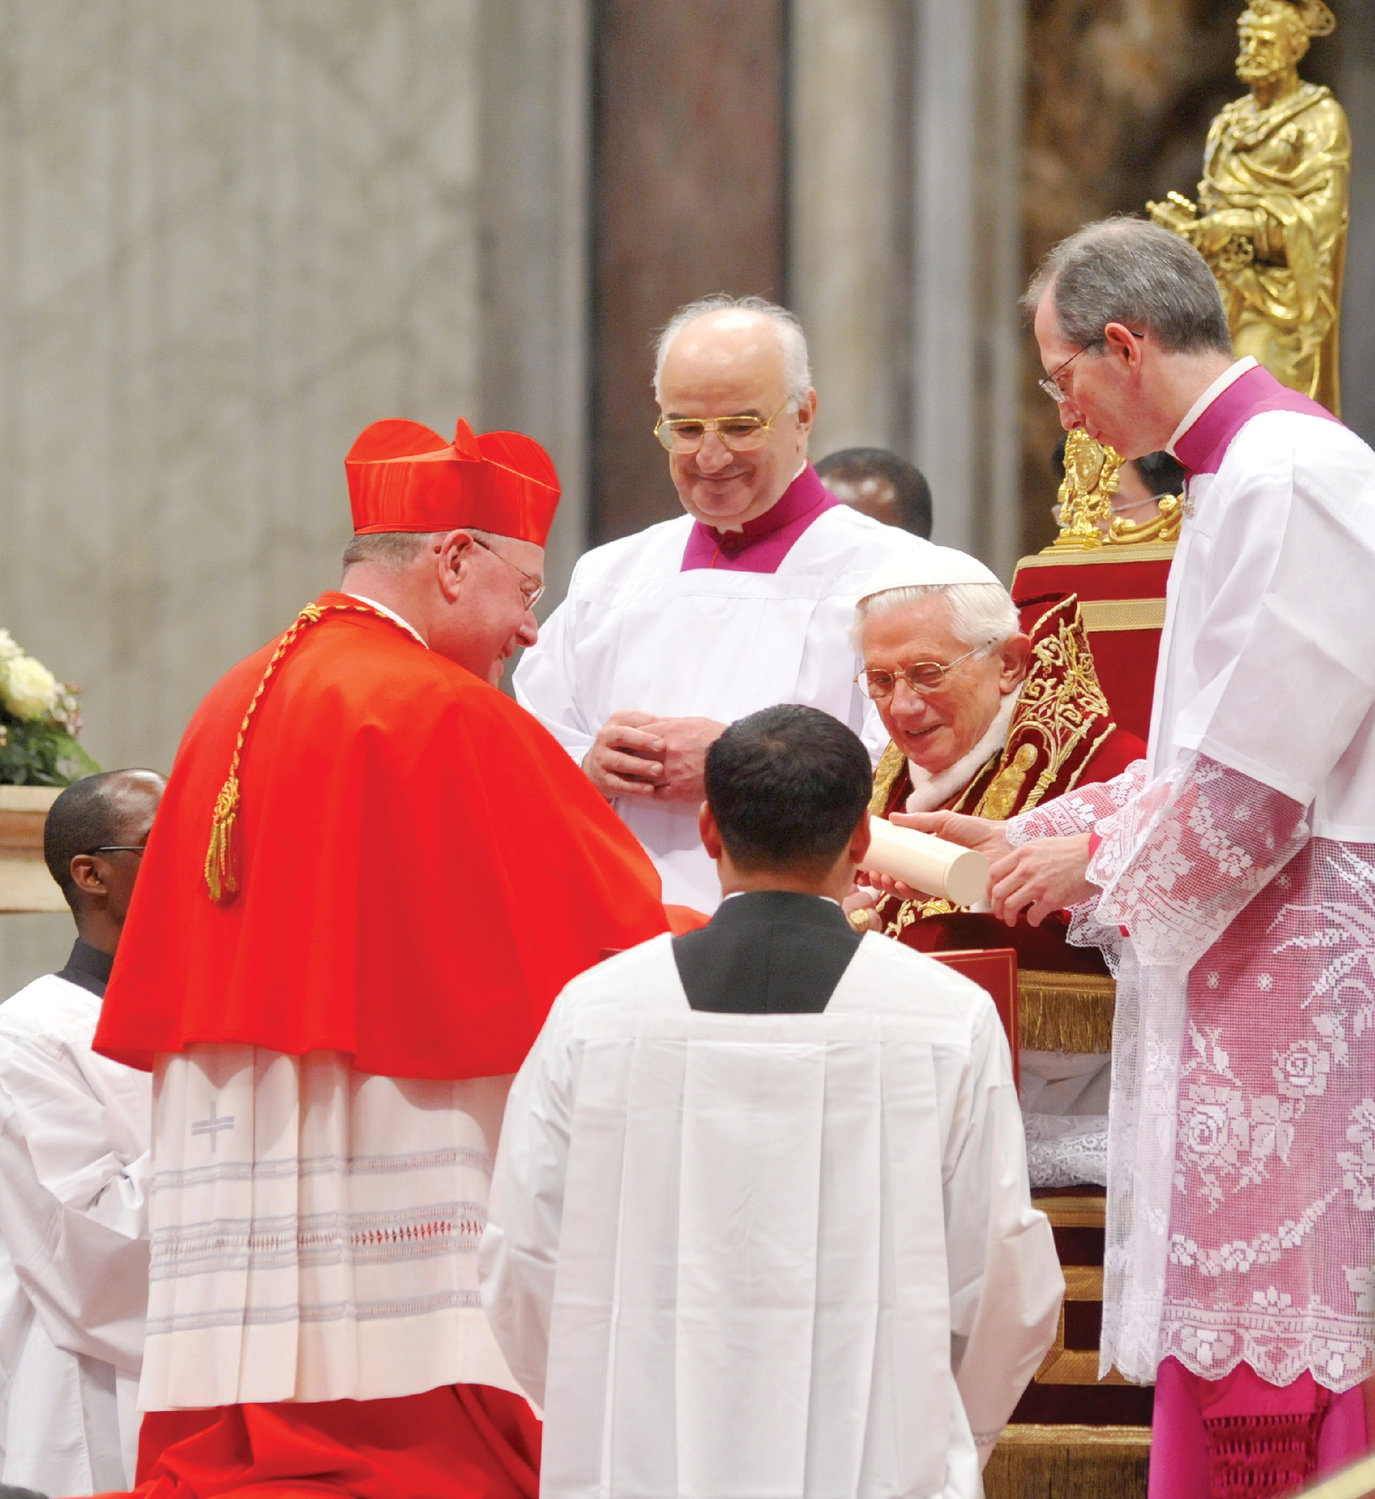 Pope Benedict XVI and Cardinal Timothy M. Dolan beam during consistory in St. Peter’s Basilica Feb. 18, 2012 in which the Archbishop of New York and 21 other churchmen from around the world became members of the College of Cardinals.